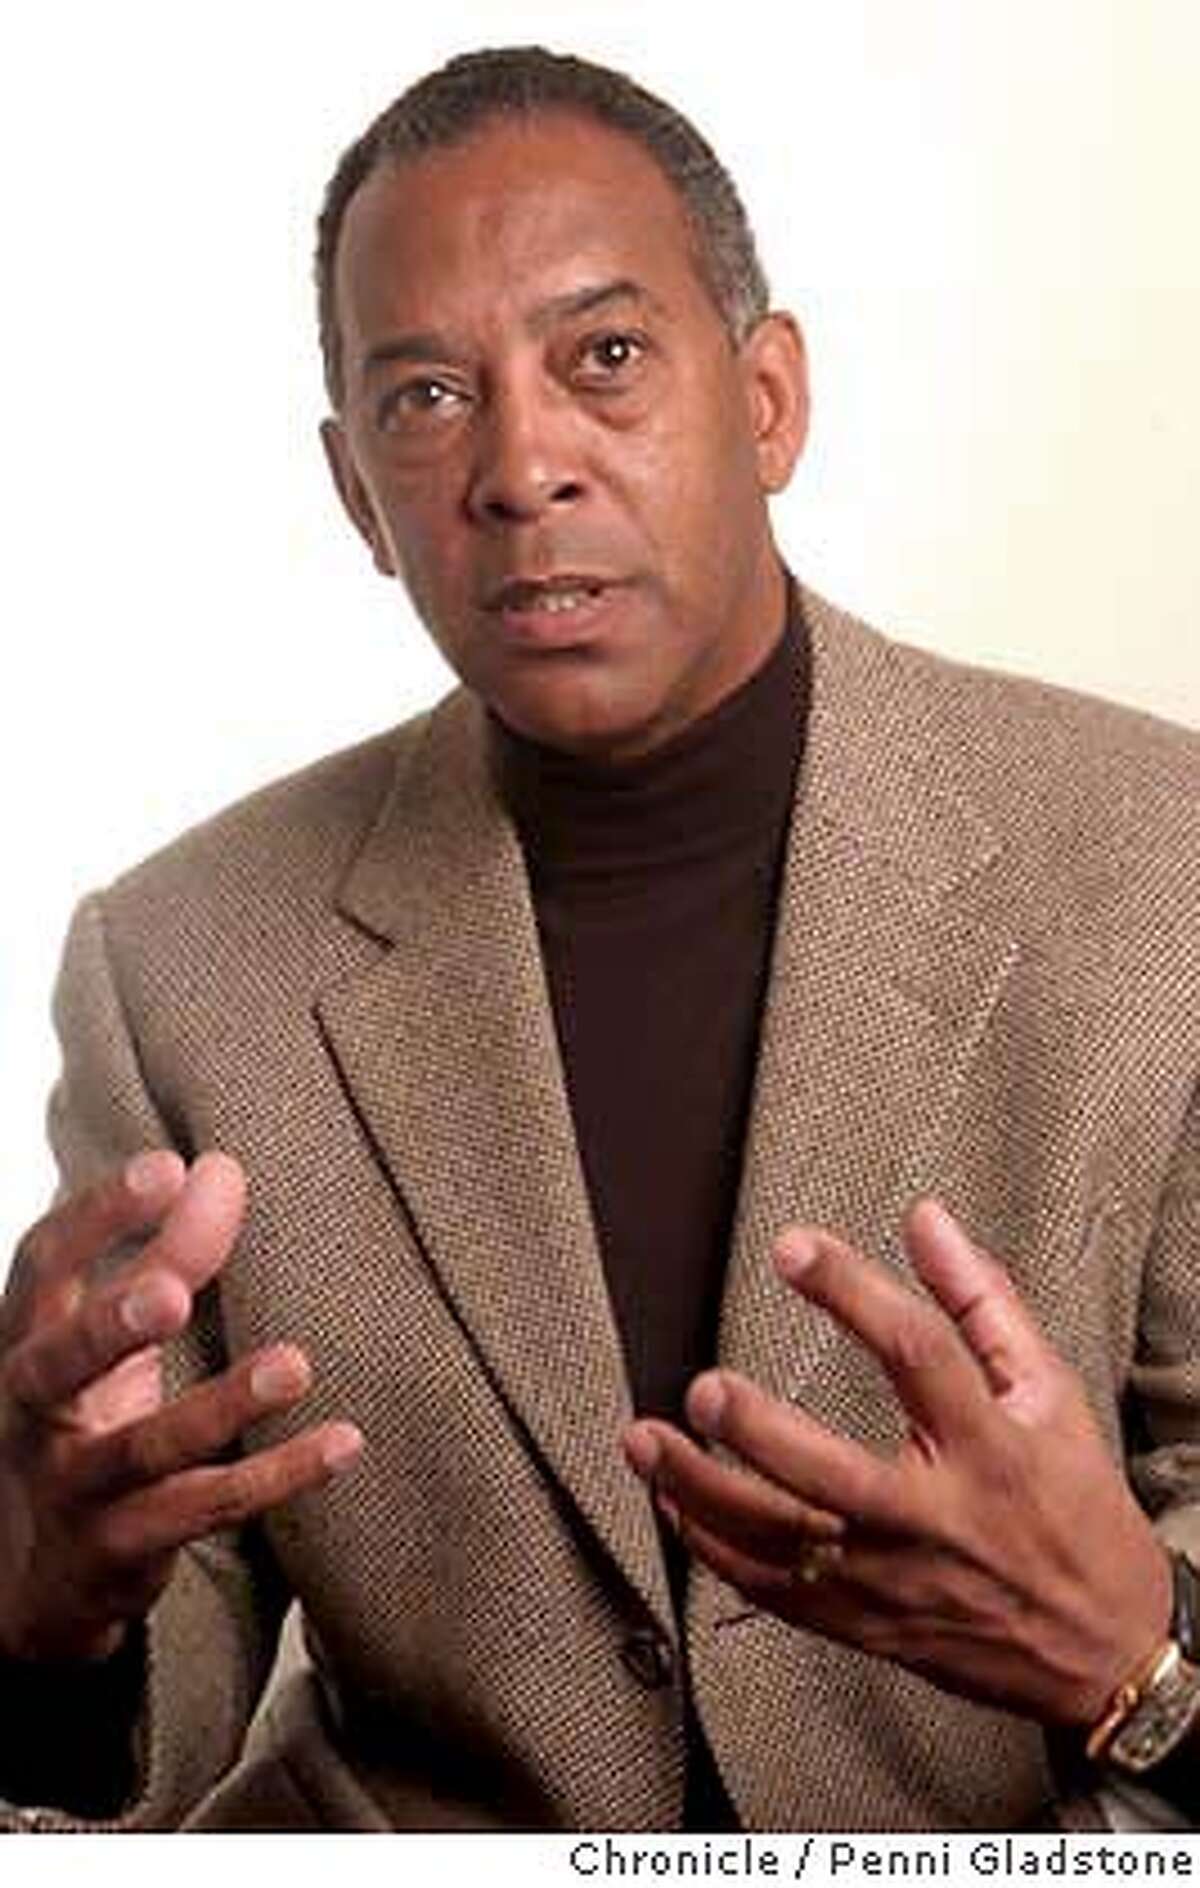 THOMPSON04_035_PG.jpg John Thompson, CEO of Symantec. Photo taken on 12/16/03 in San Francisco. Photo by Penni Gladstone / The San Francisco Chronicle ProductNameChronicle MANDATORY CREDIT FOR PHOTOG AND SF CHRONICLE/ -MAGS OUT